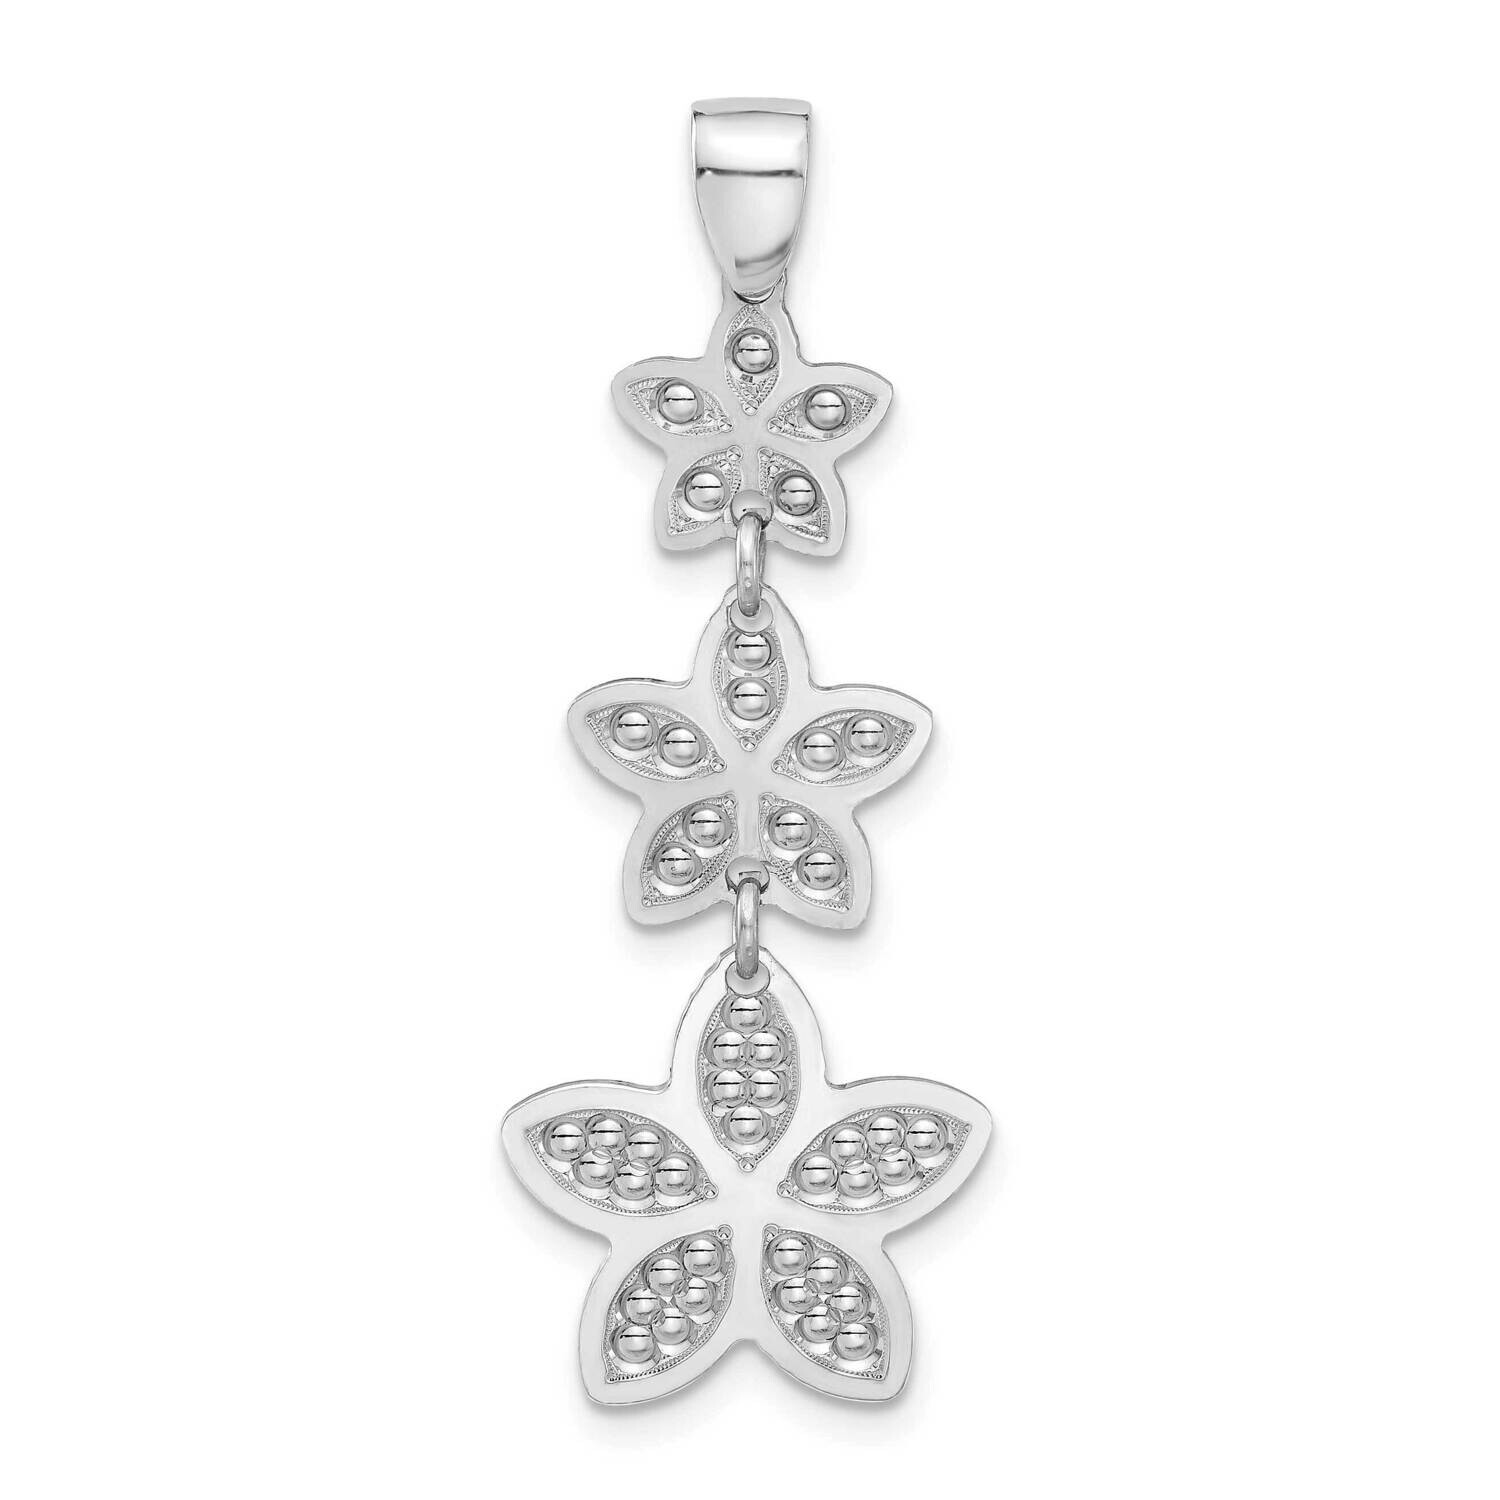 Rhodium Polished Plated Beaded Flower Pendant Sterling Silver QP5805